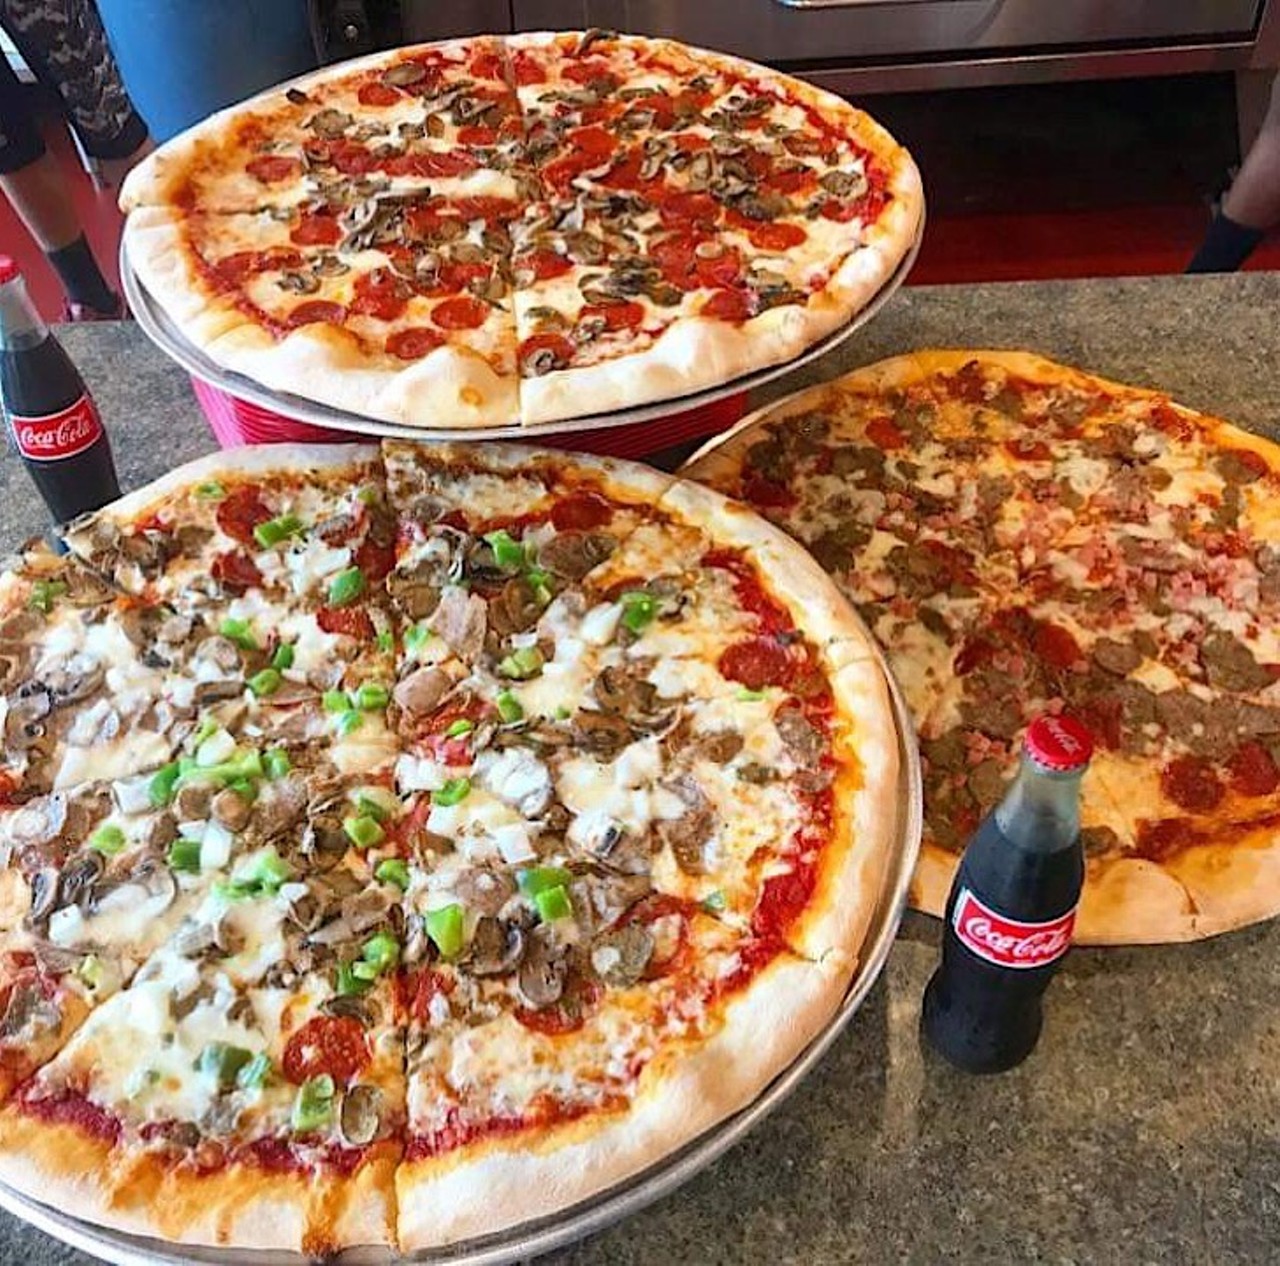 Eddie and Sam&#146;s  
203 E Twiggs St, Tampa, 813-229-8500
If you&#146;re in the mood for a simple slice of pizza, stop by Eddie and Sam&#146;s. Plus, they even have a pretty solid daily deal for two slices and a coke.
Photo via Eddie and Sam&#146;s/Facebook